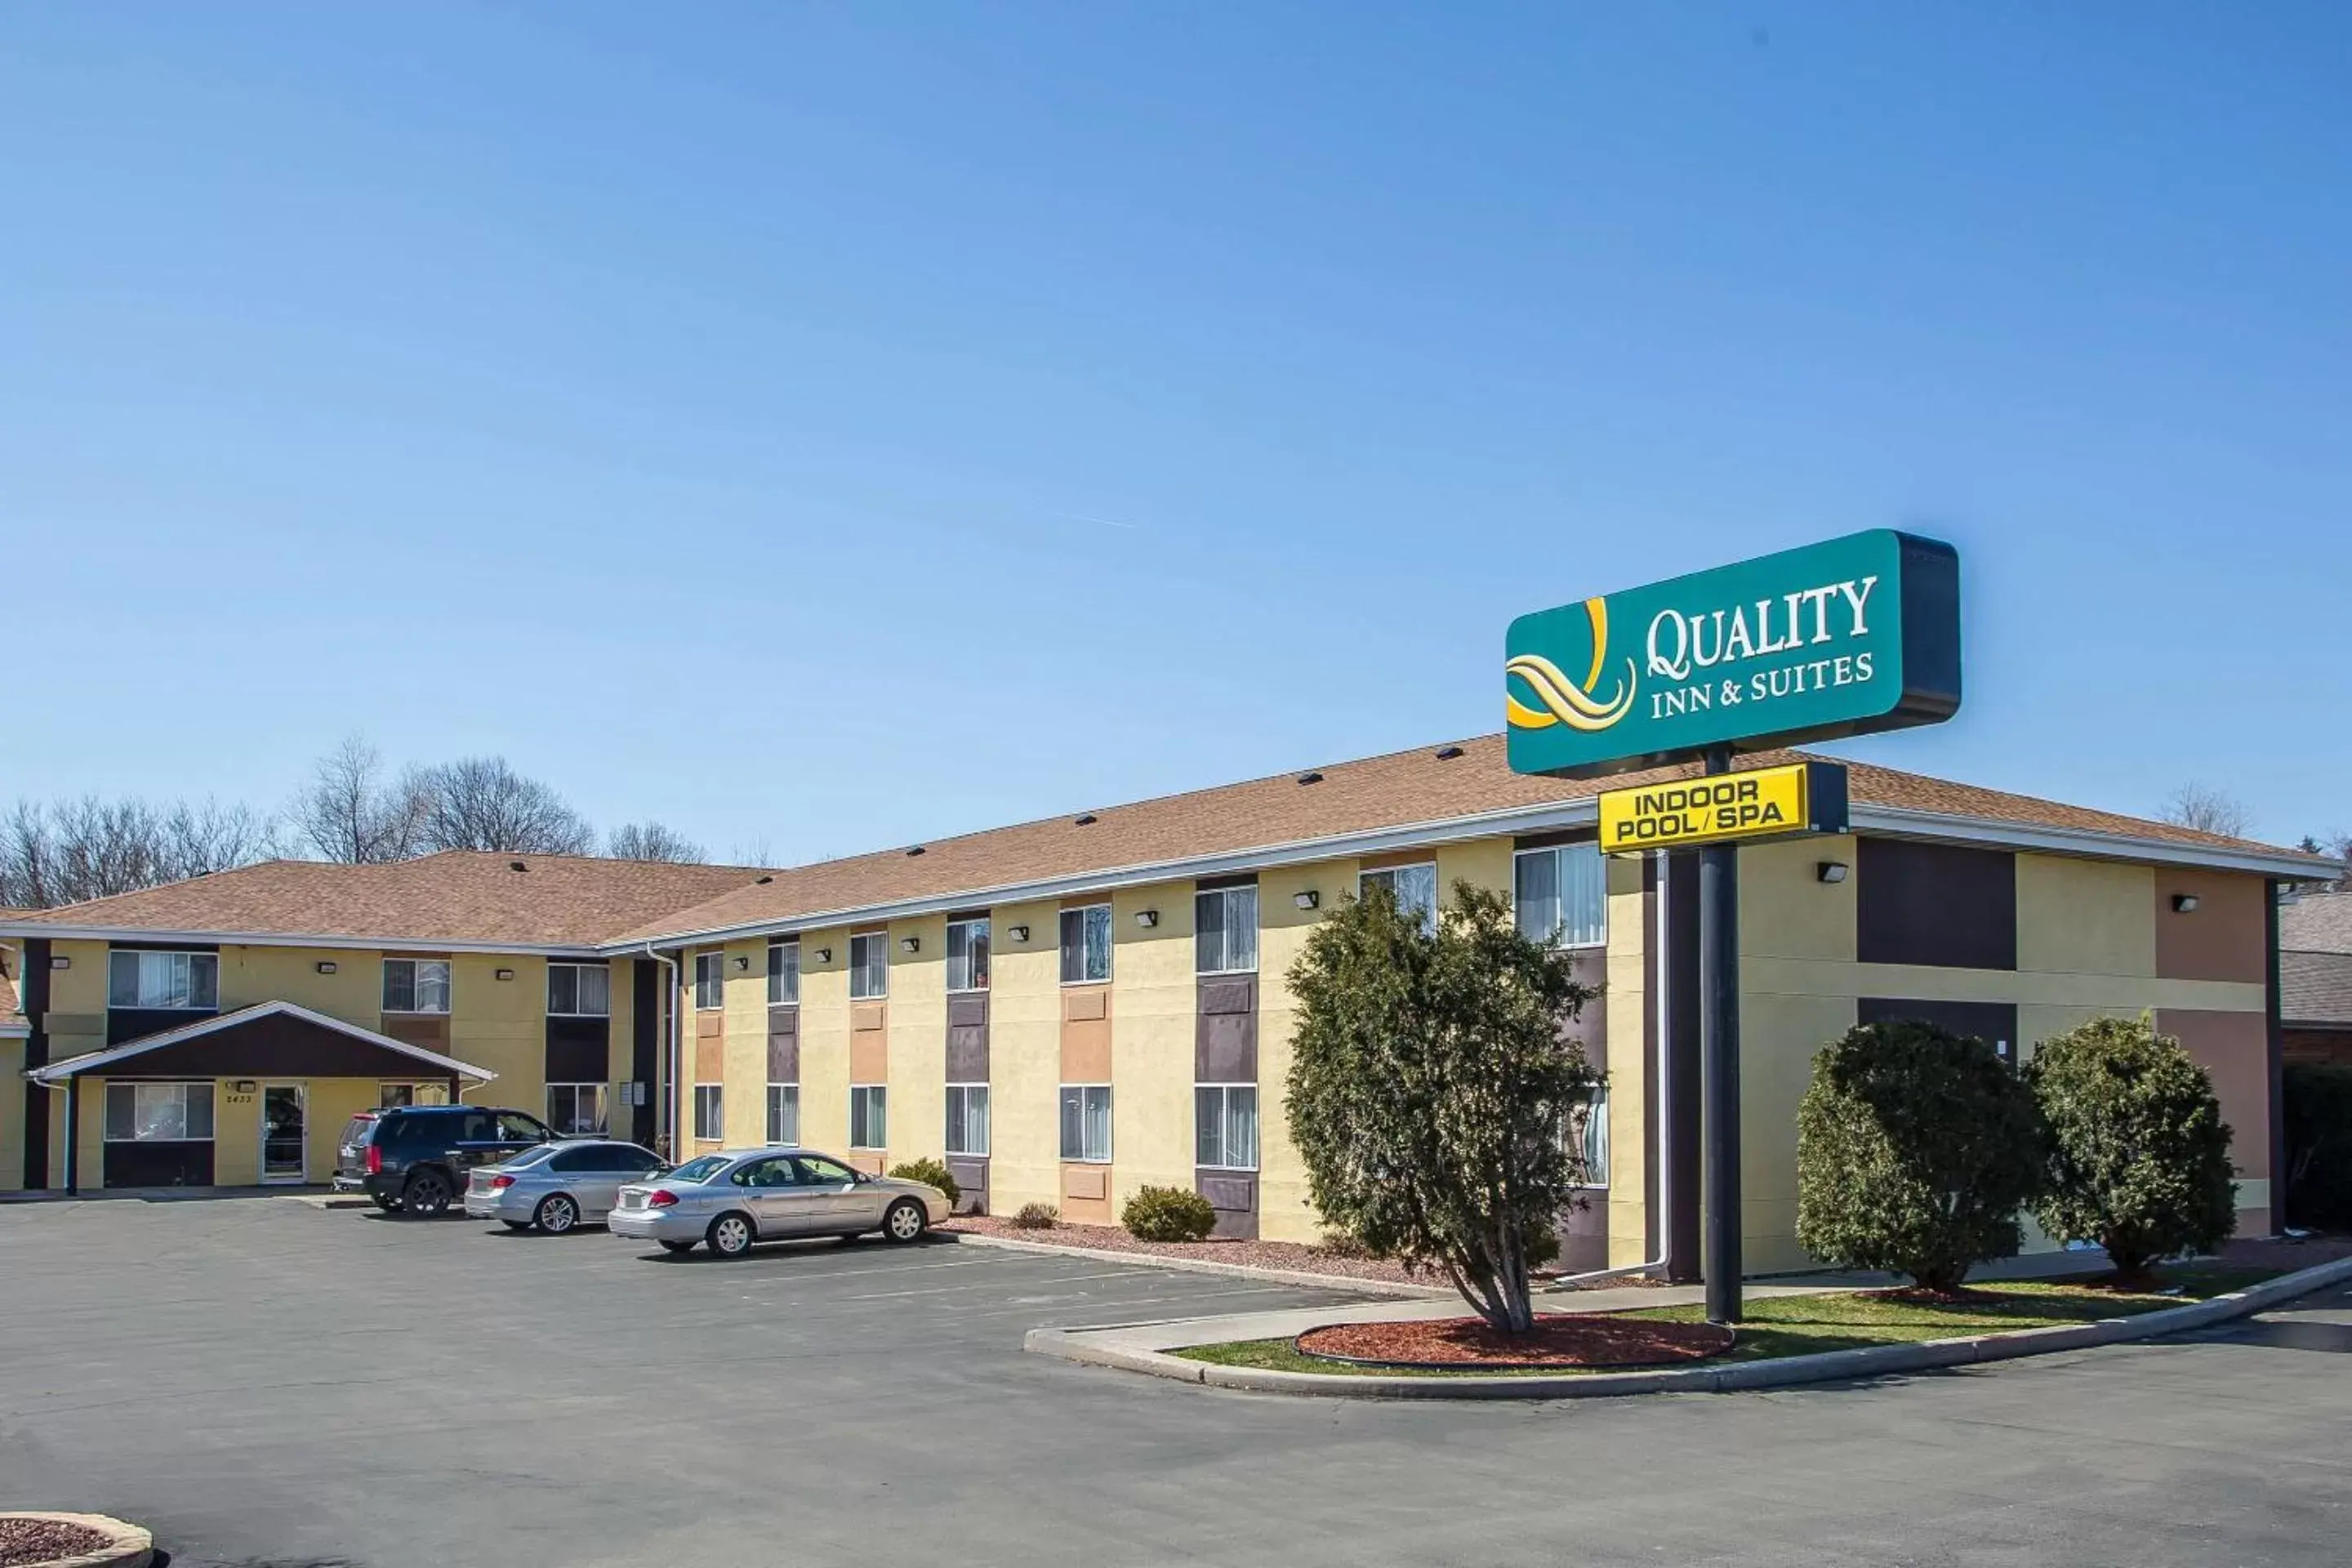 Property building in Quality Inn & Suites West Bend